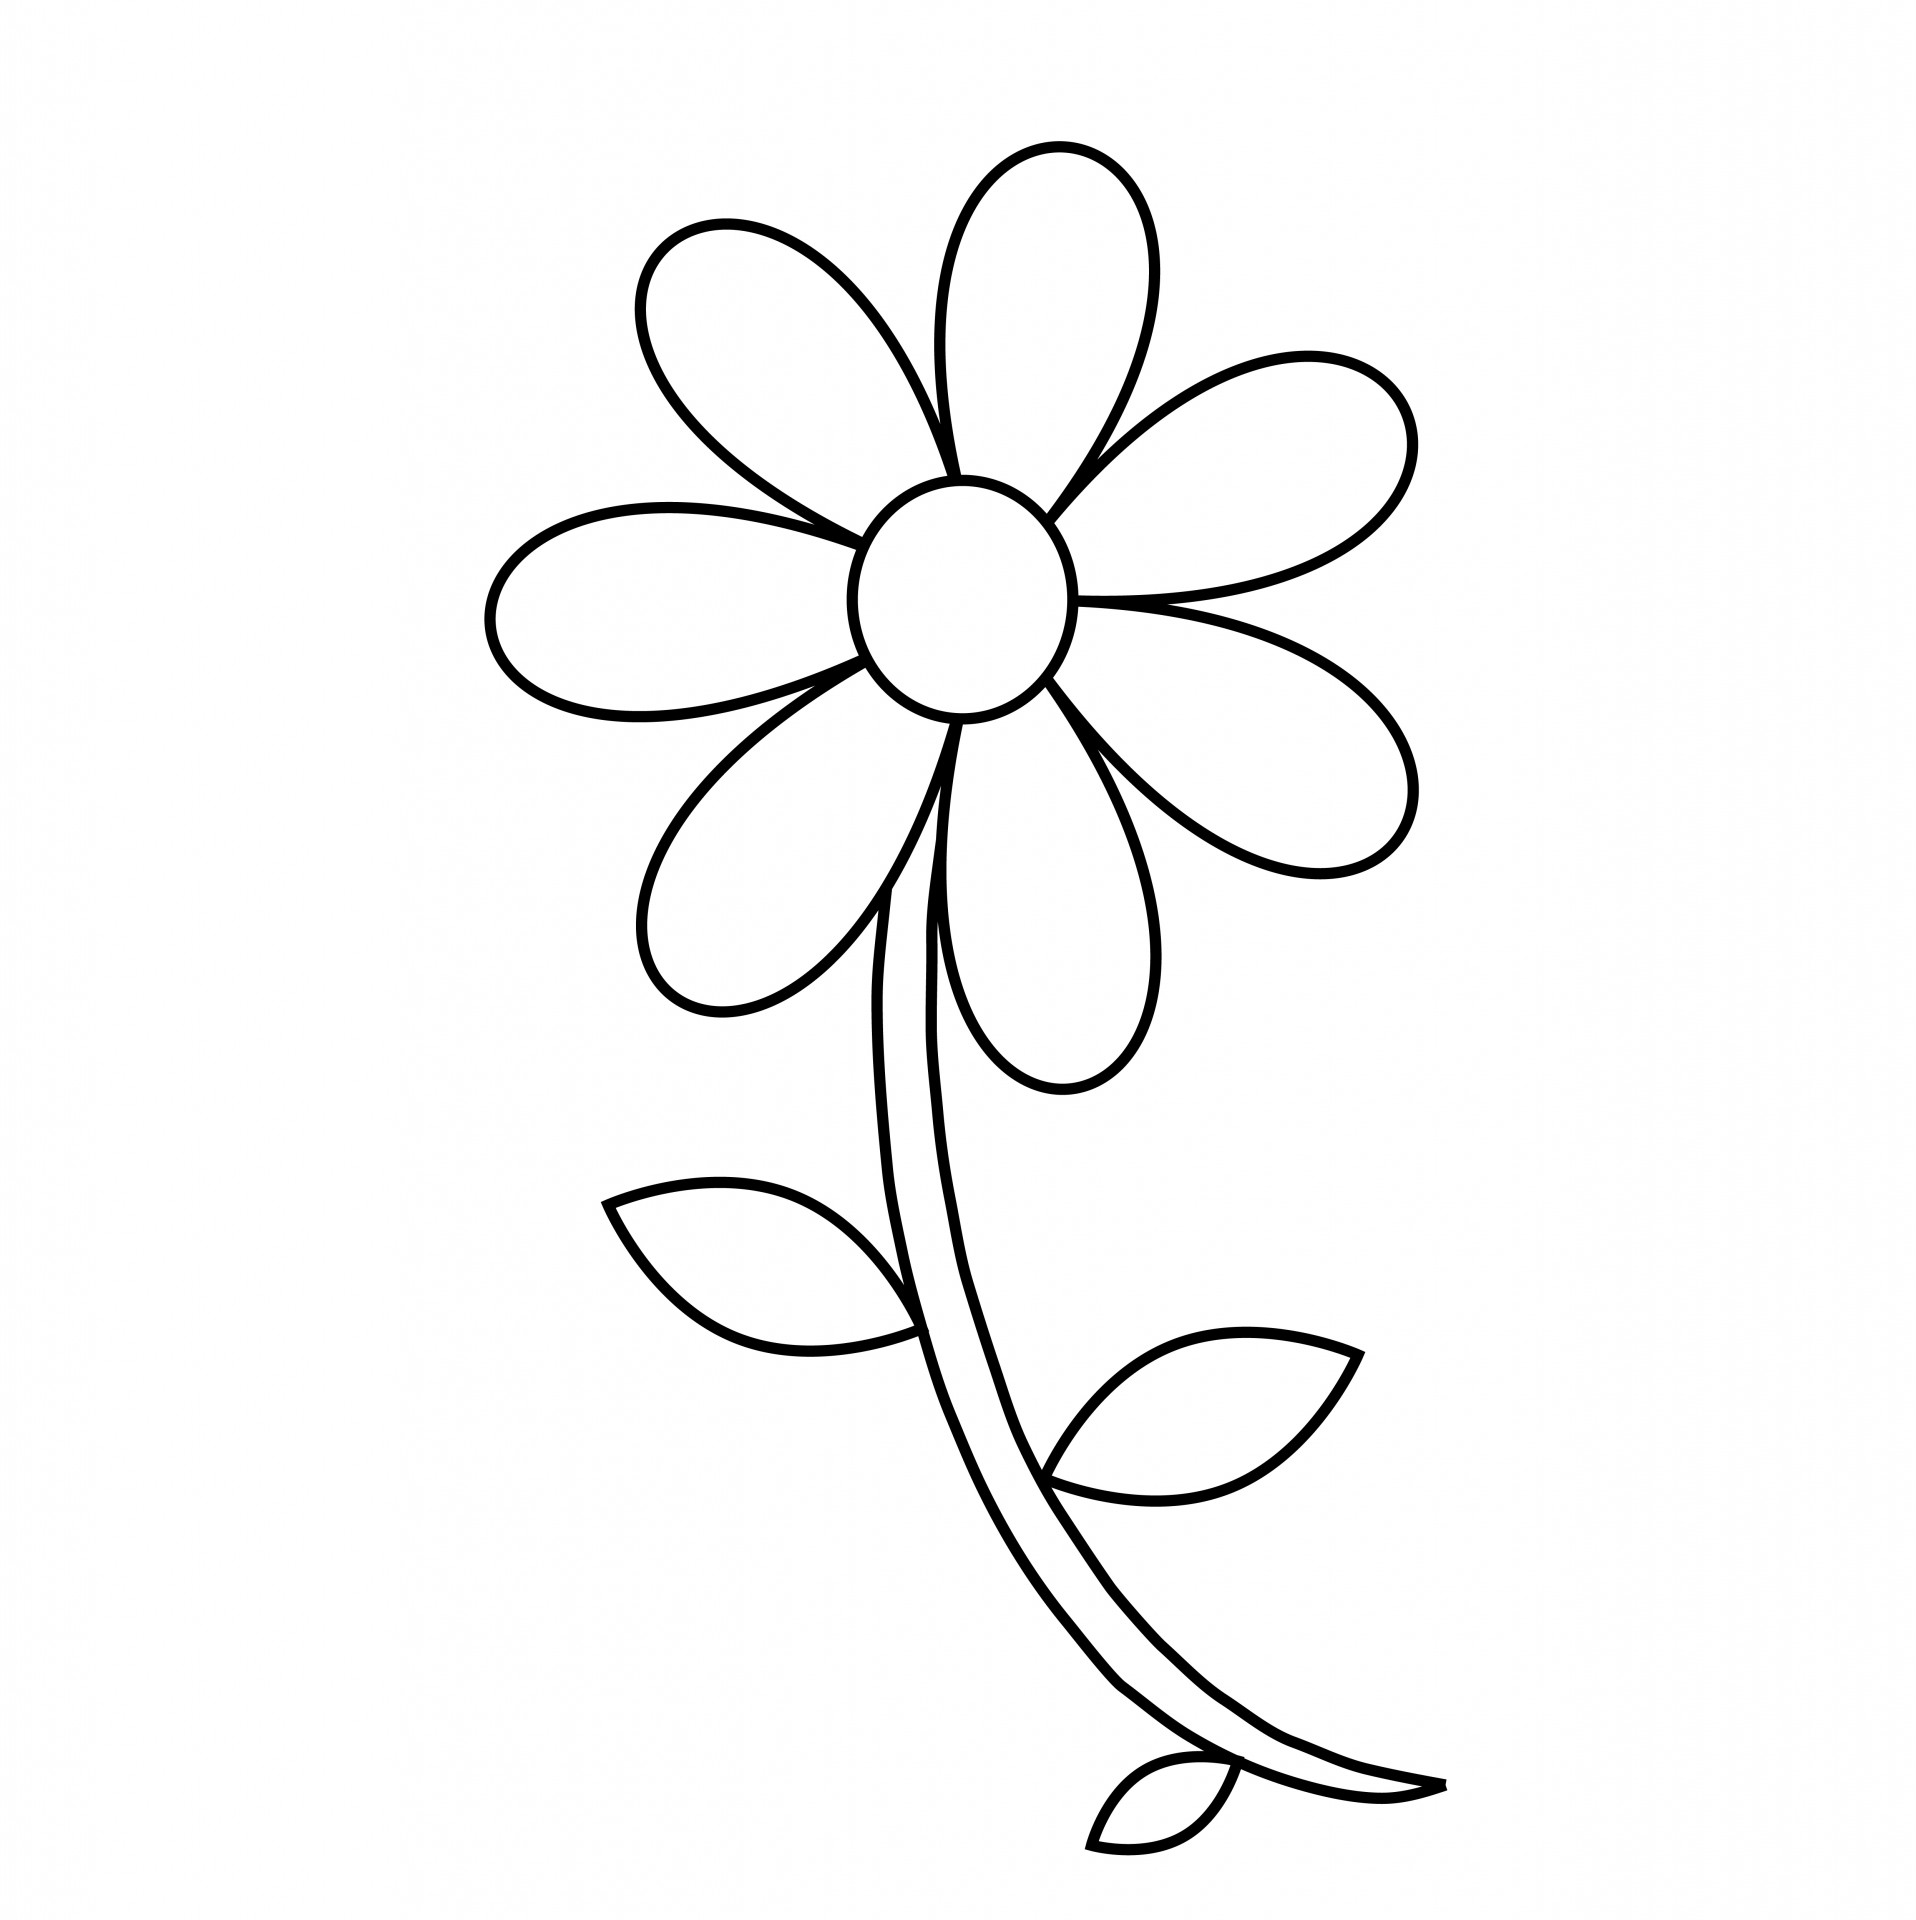 Black And White Flower Outline | Free Download Clip Art | Free ...